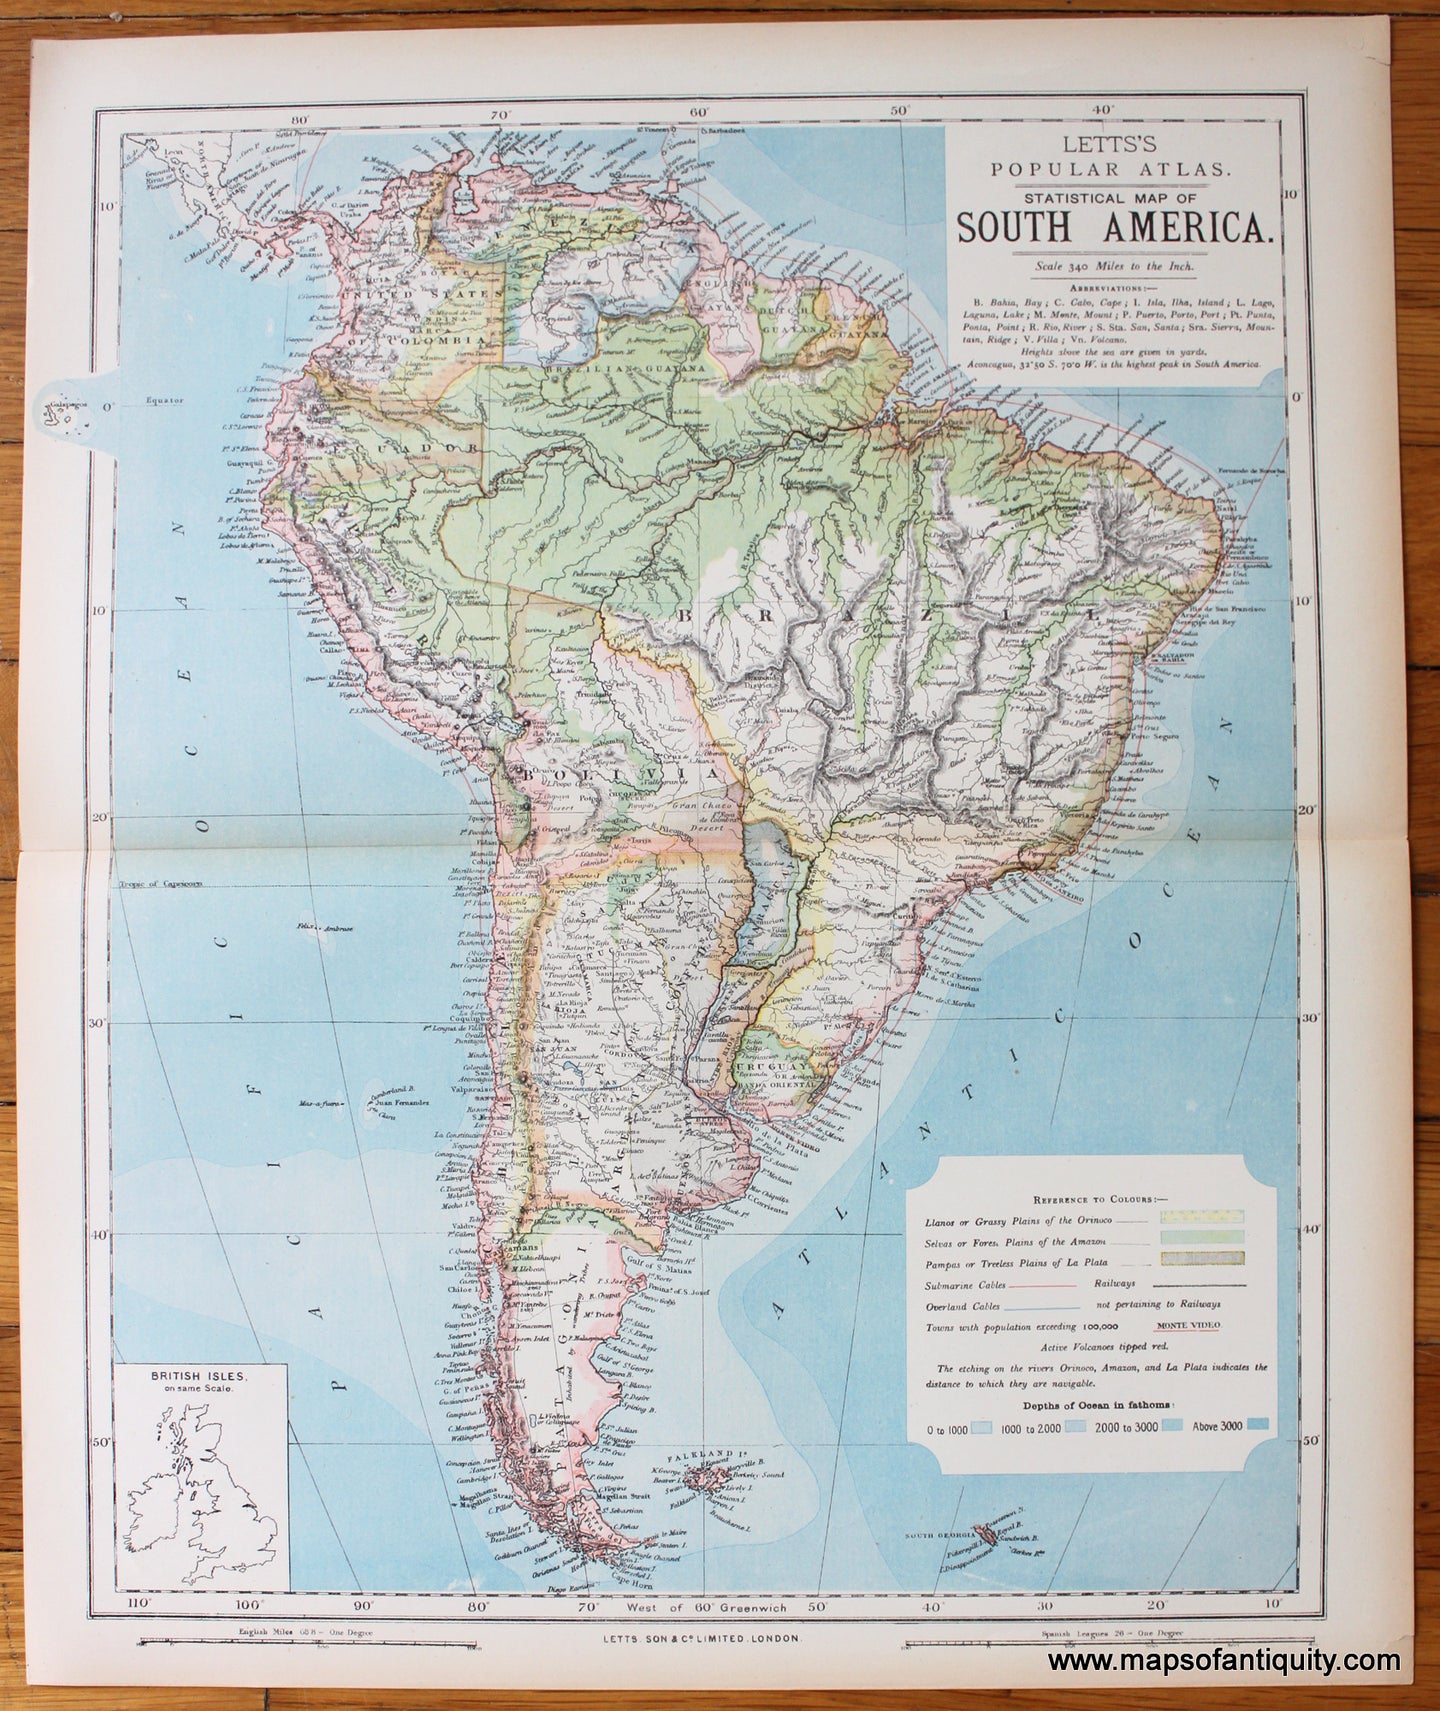 printed-color-Antique-Map-Statistical-Map-of-South-America-South-America-South-America-General-1883-Letts-Maps-Of-Antiquity